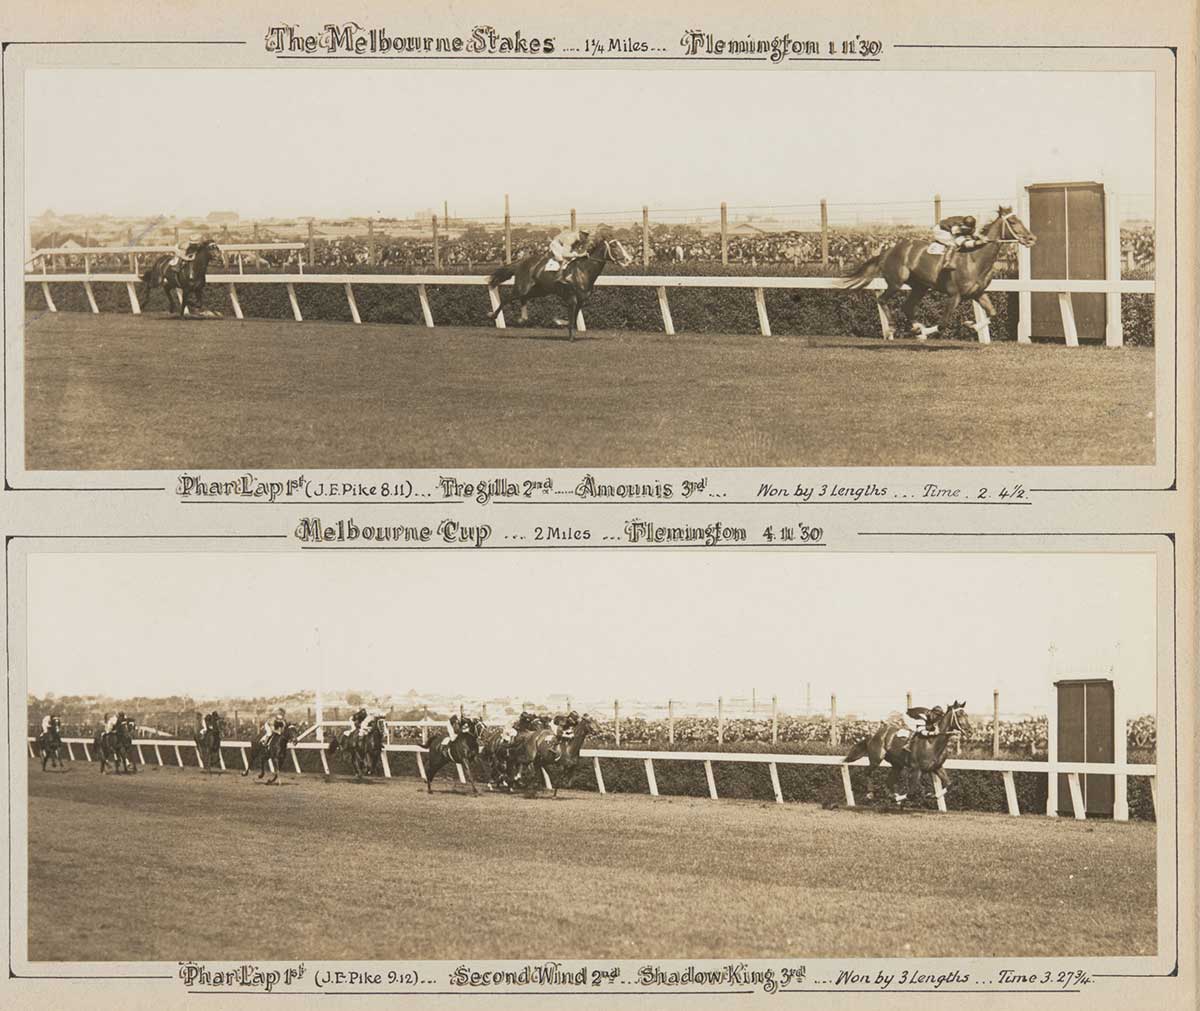 Two black and white photographs of a horse race, featuring Phar Lap in first place. 